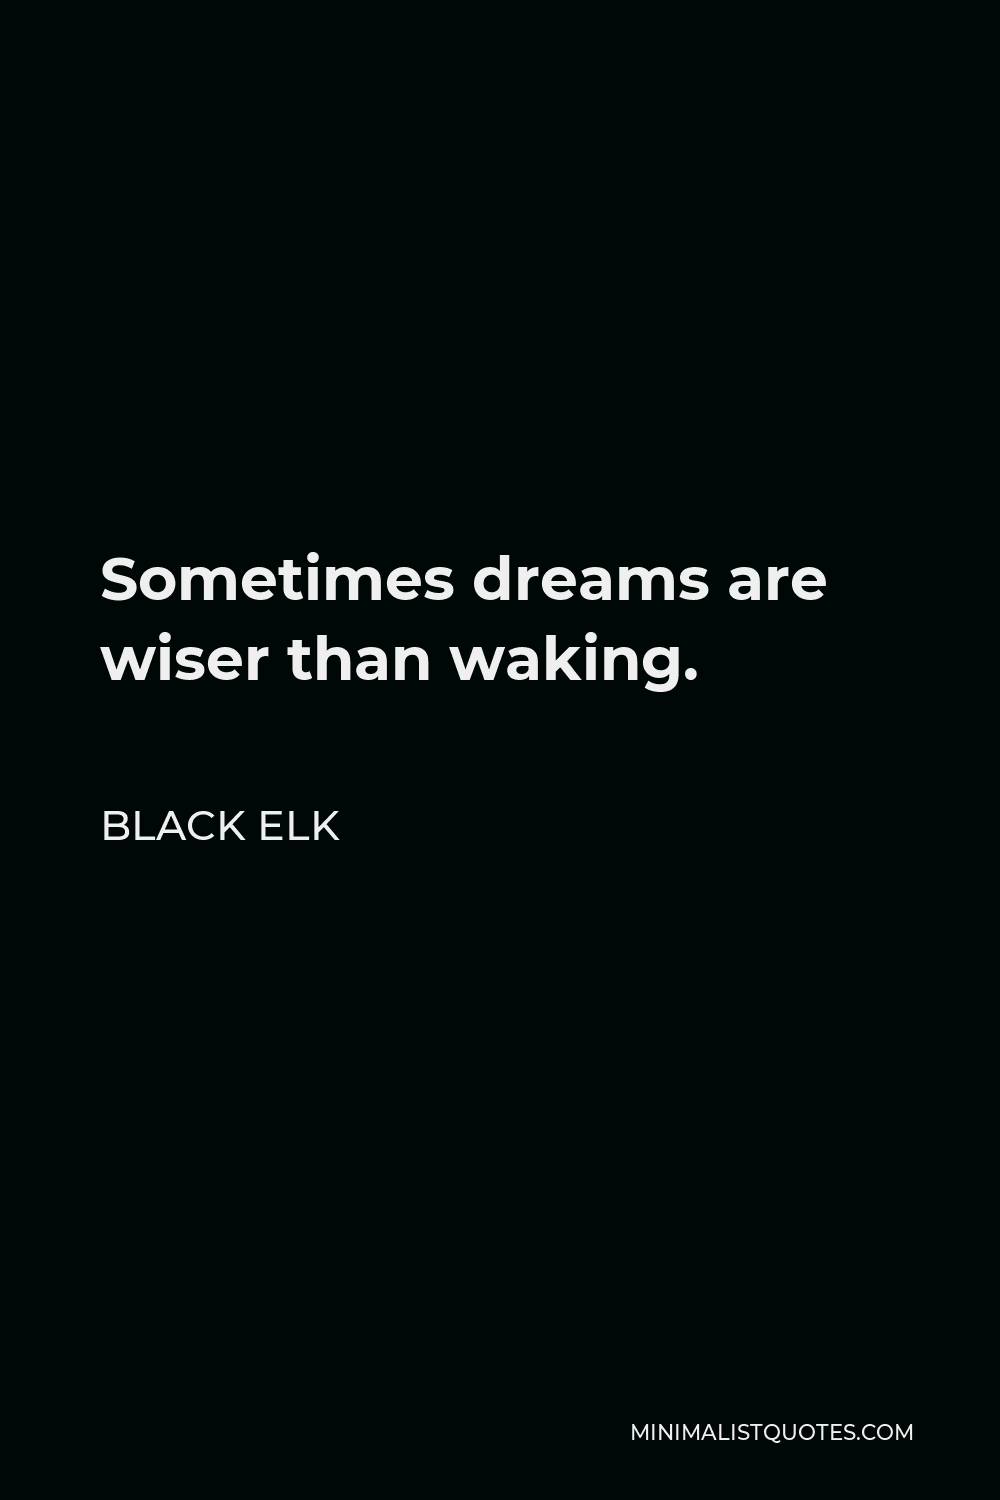 Black Elk Quote - Sometimes dreams are wiser than waking.